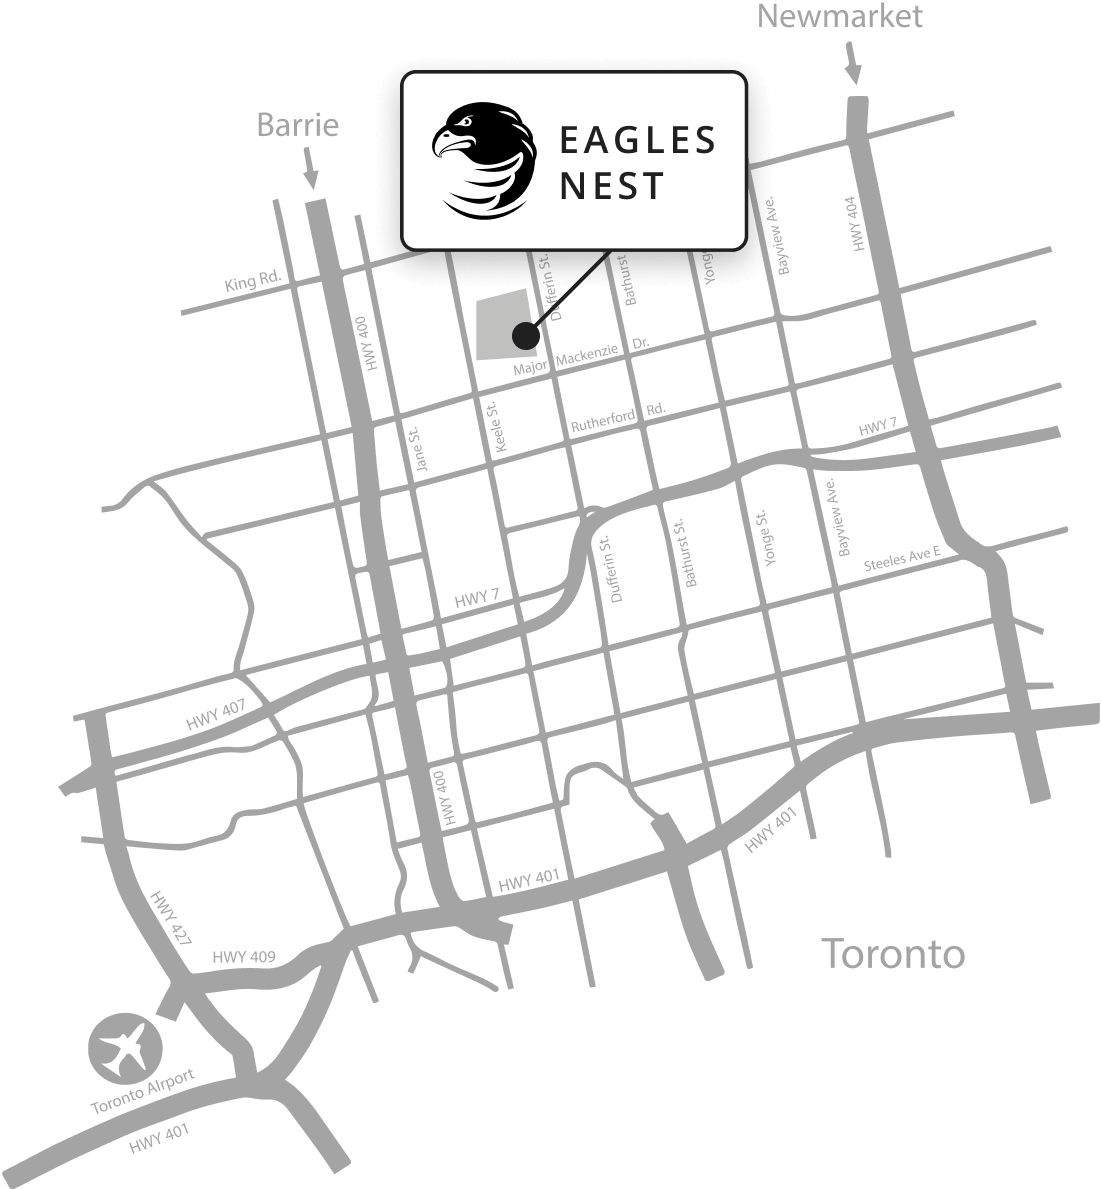 Eagles Nest location amongst the Toronto road network